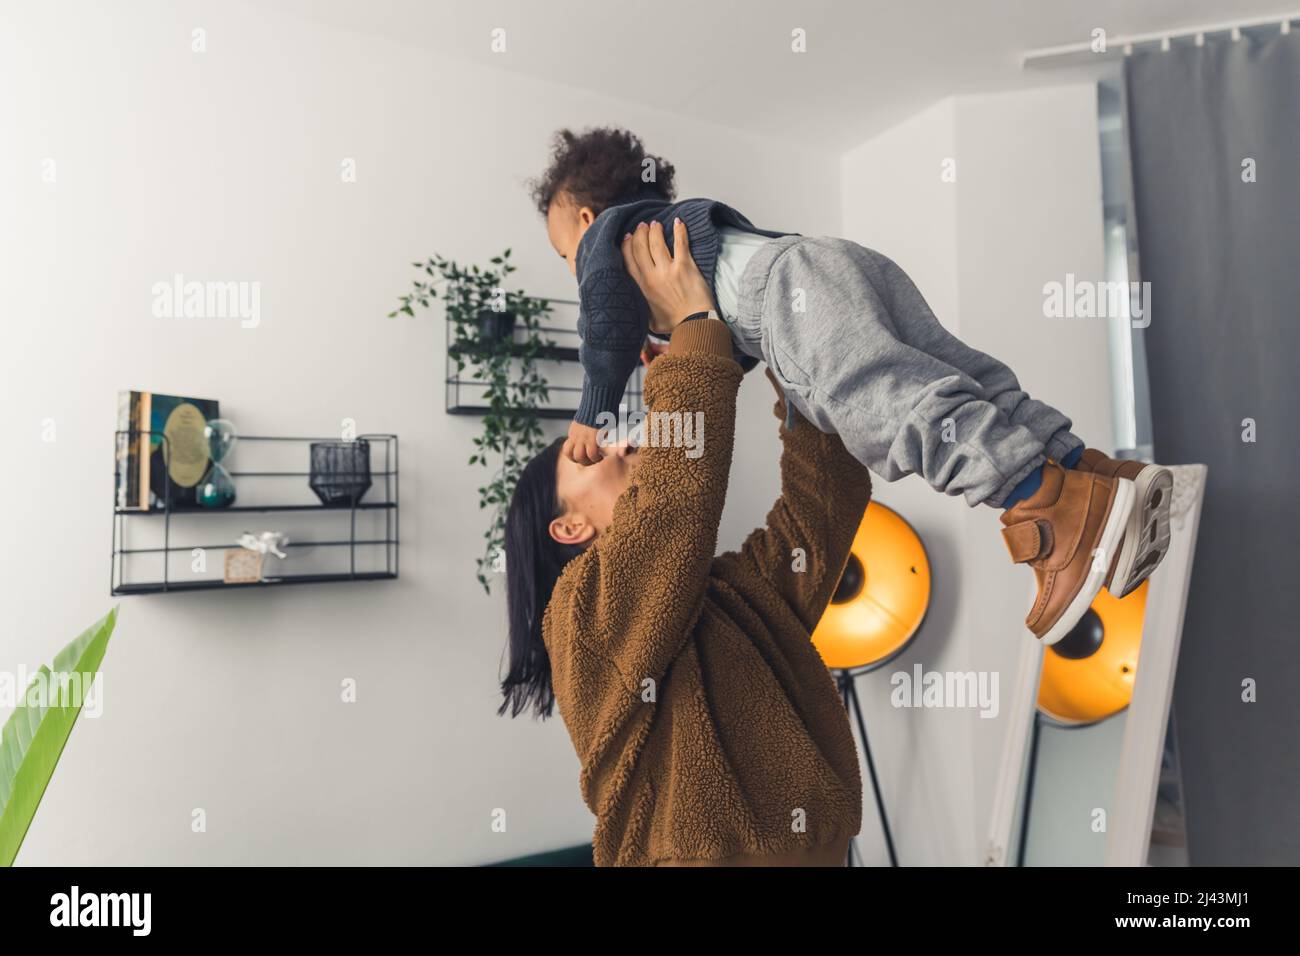 black haired woman with a brown sweater holding curled little boy upwards in the room with white rooms medium shot . High quality photo Stock Photo